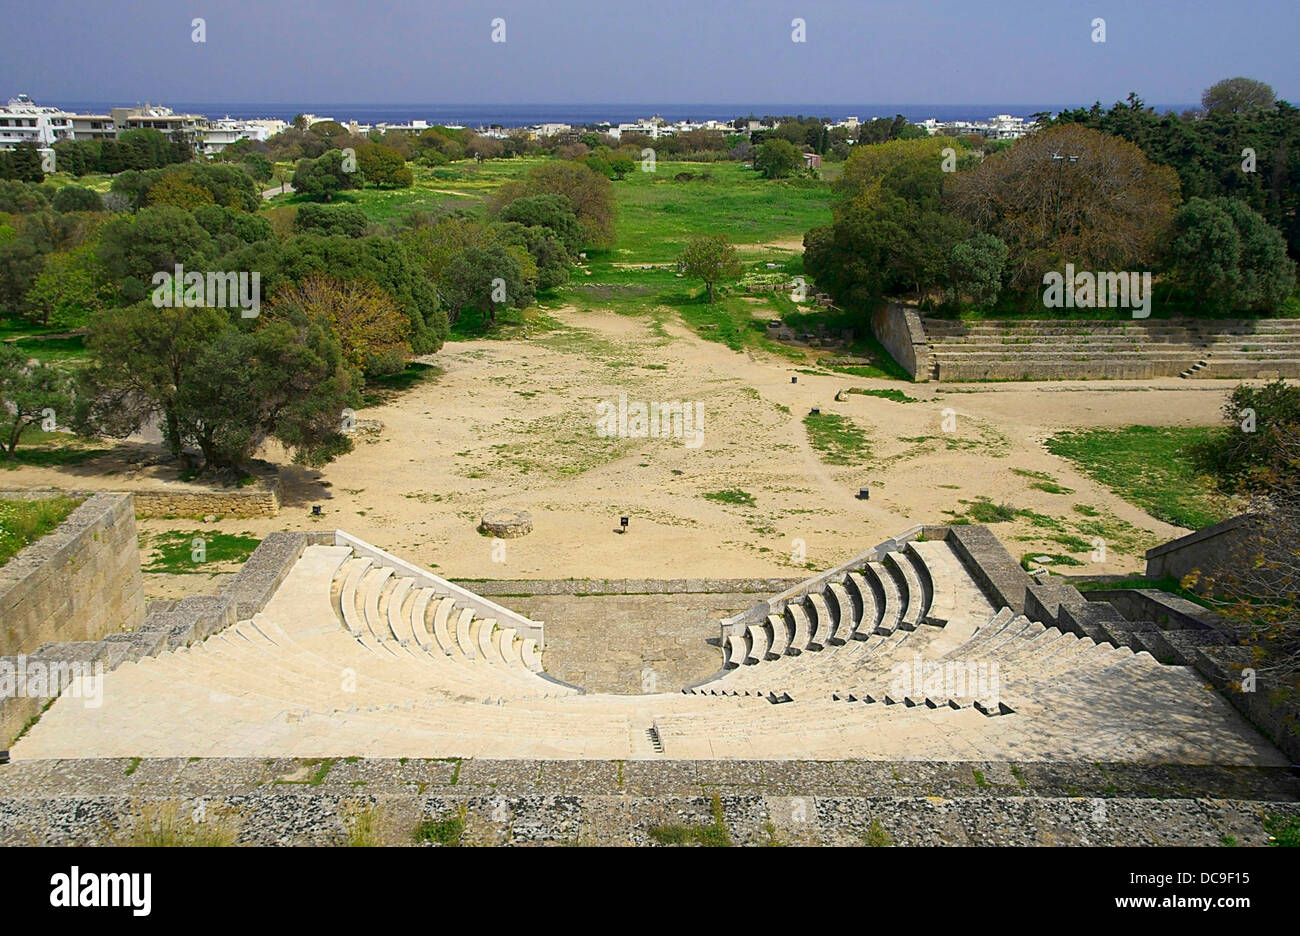 The restored theatre at Acropolis of Rhodes, Greece. Stock Photo